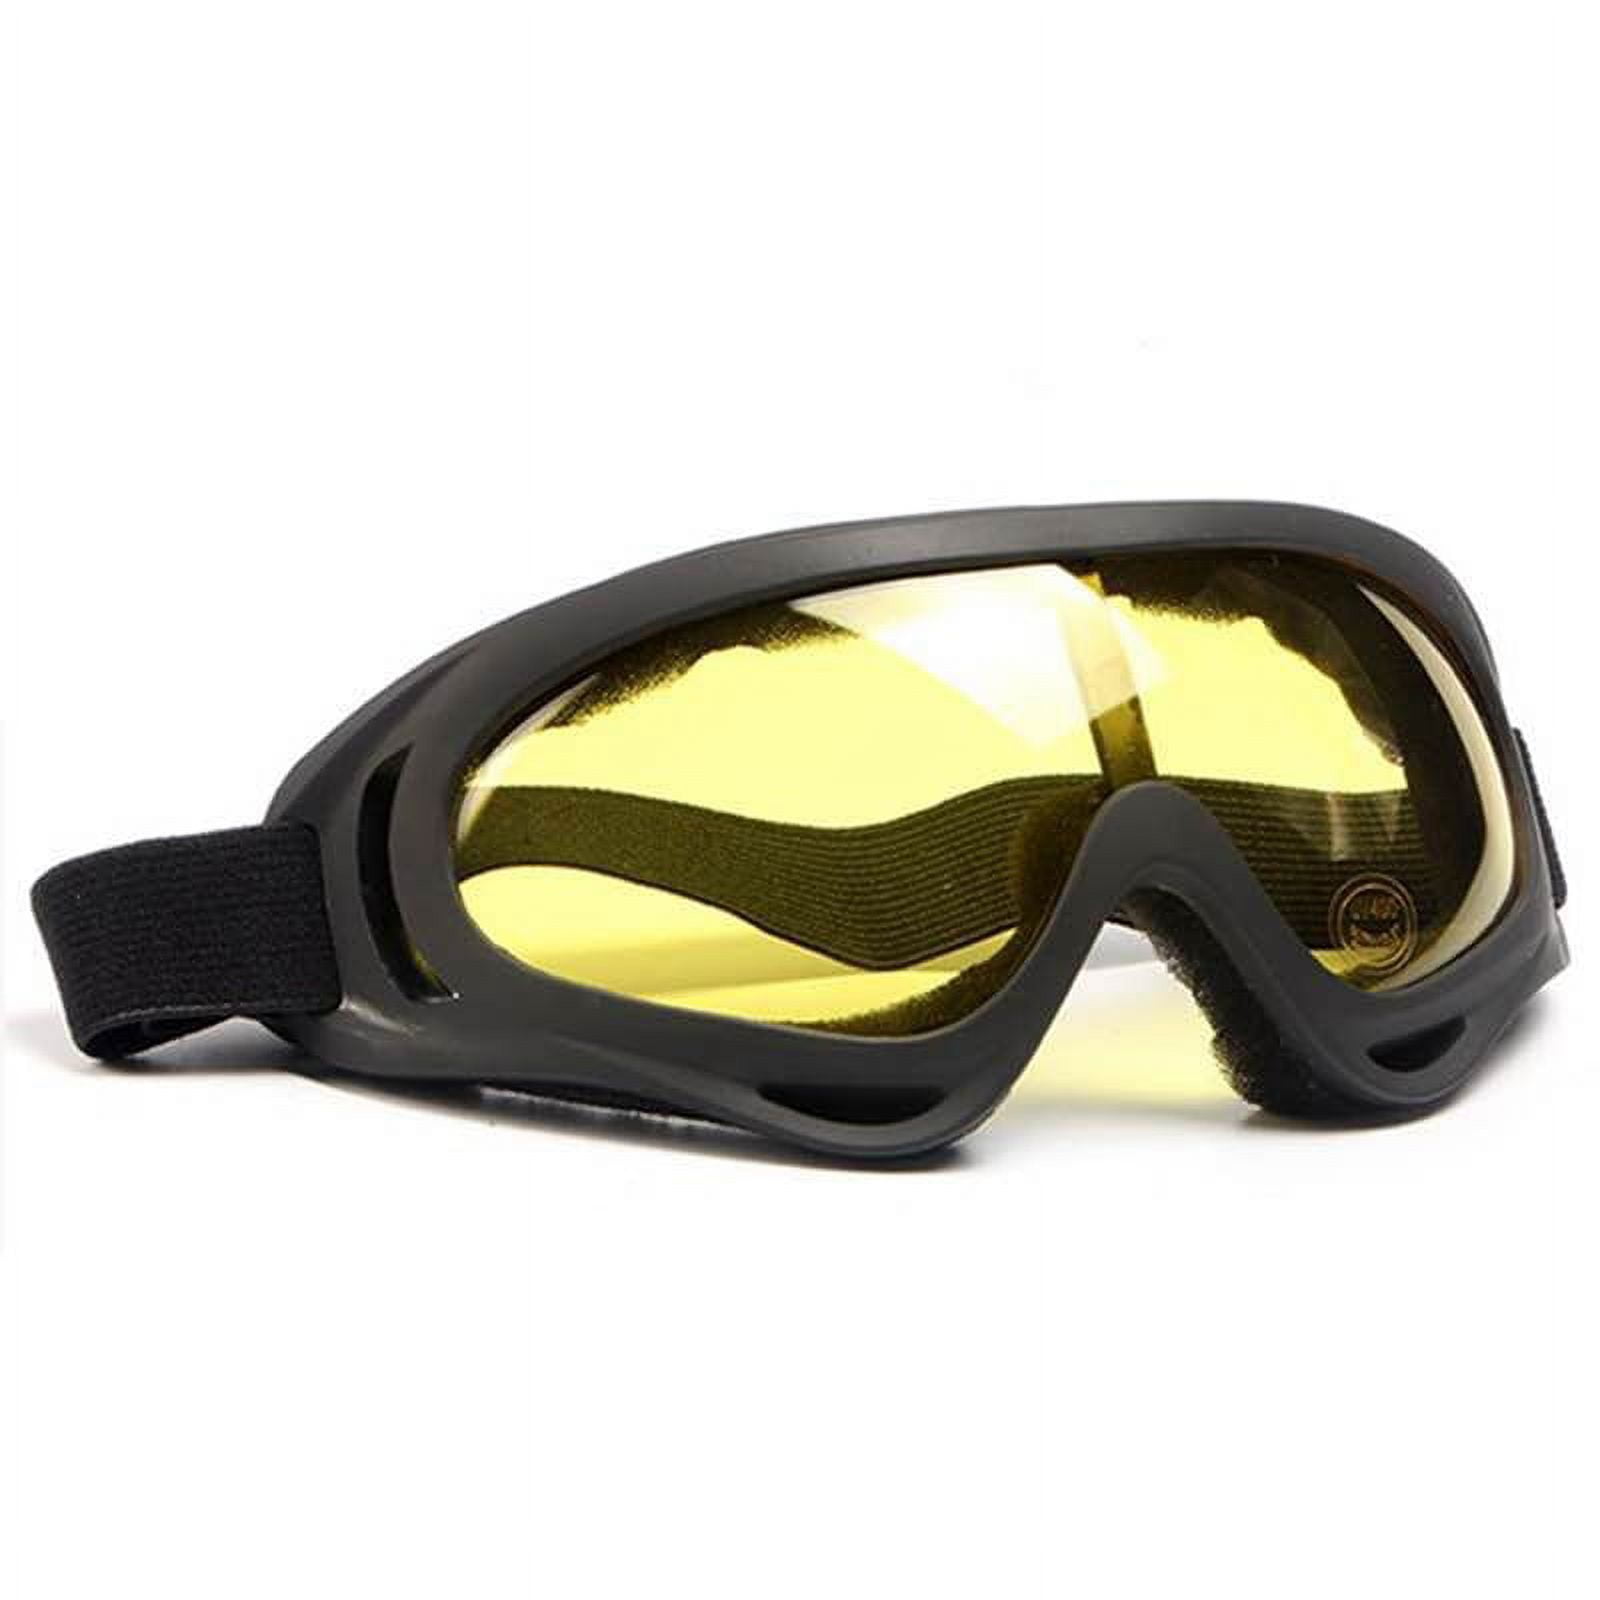 Riapawel Safety Goggles Eye Protective Over Glasses Concealer Clear ...